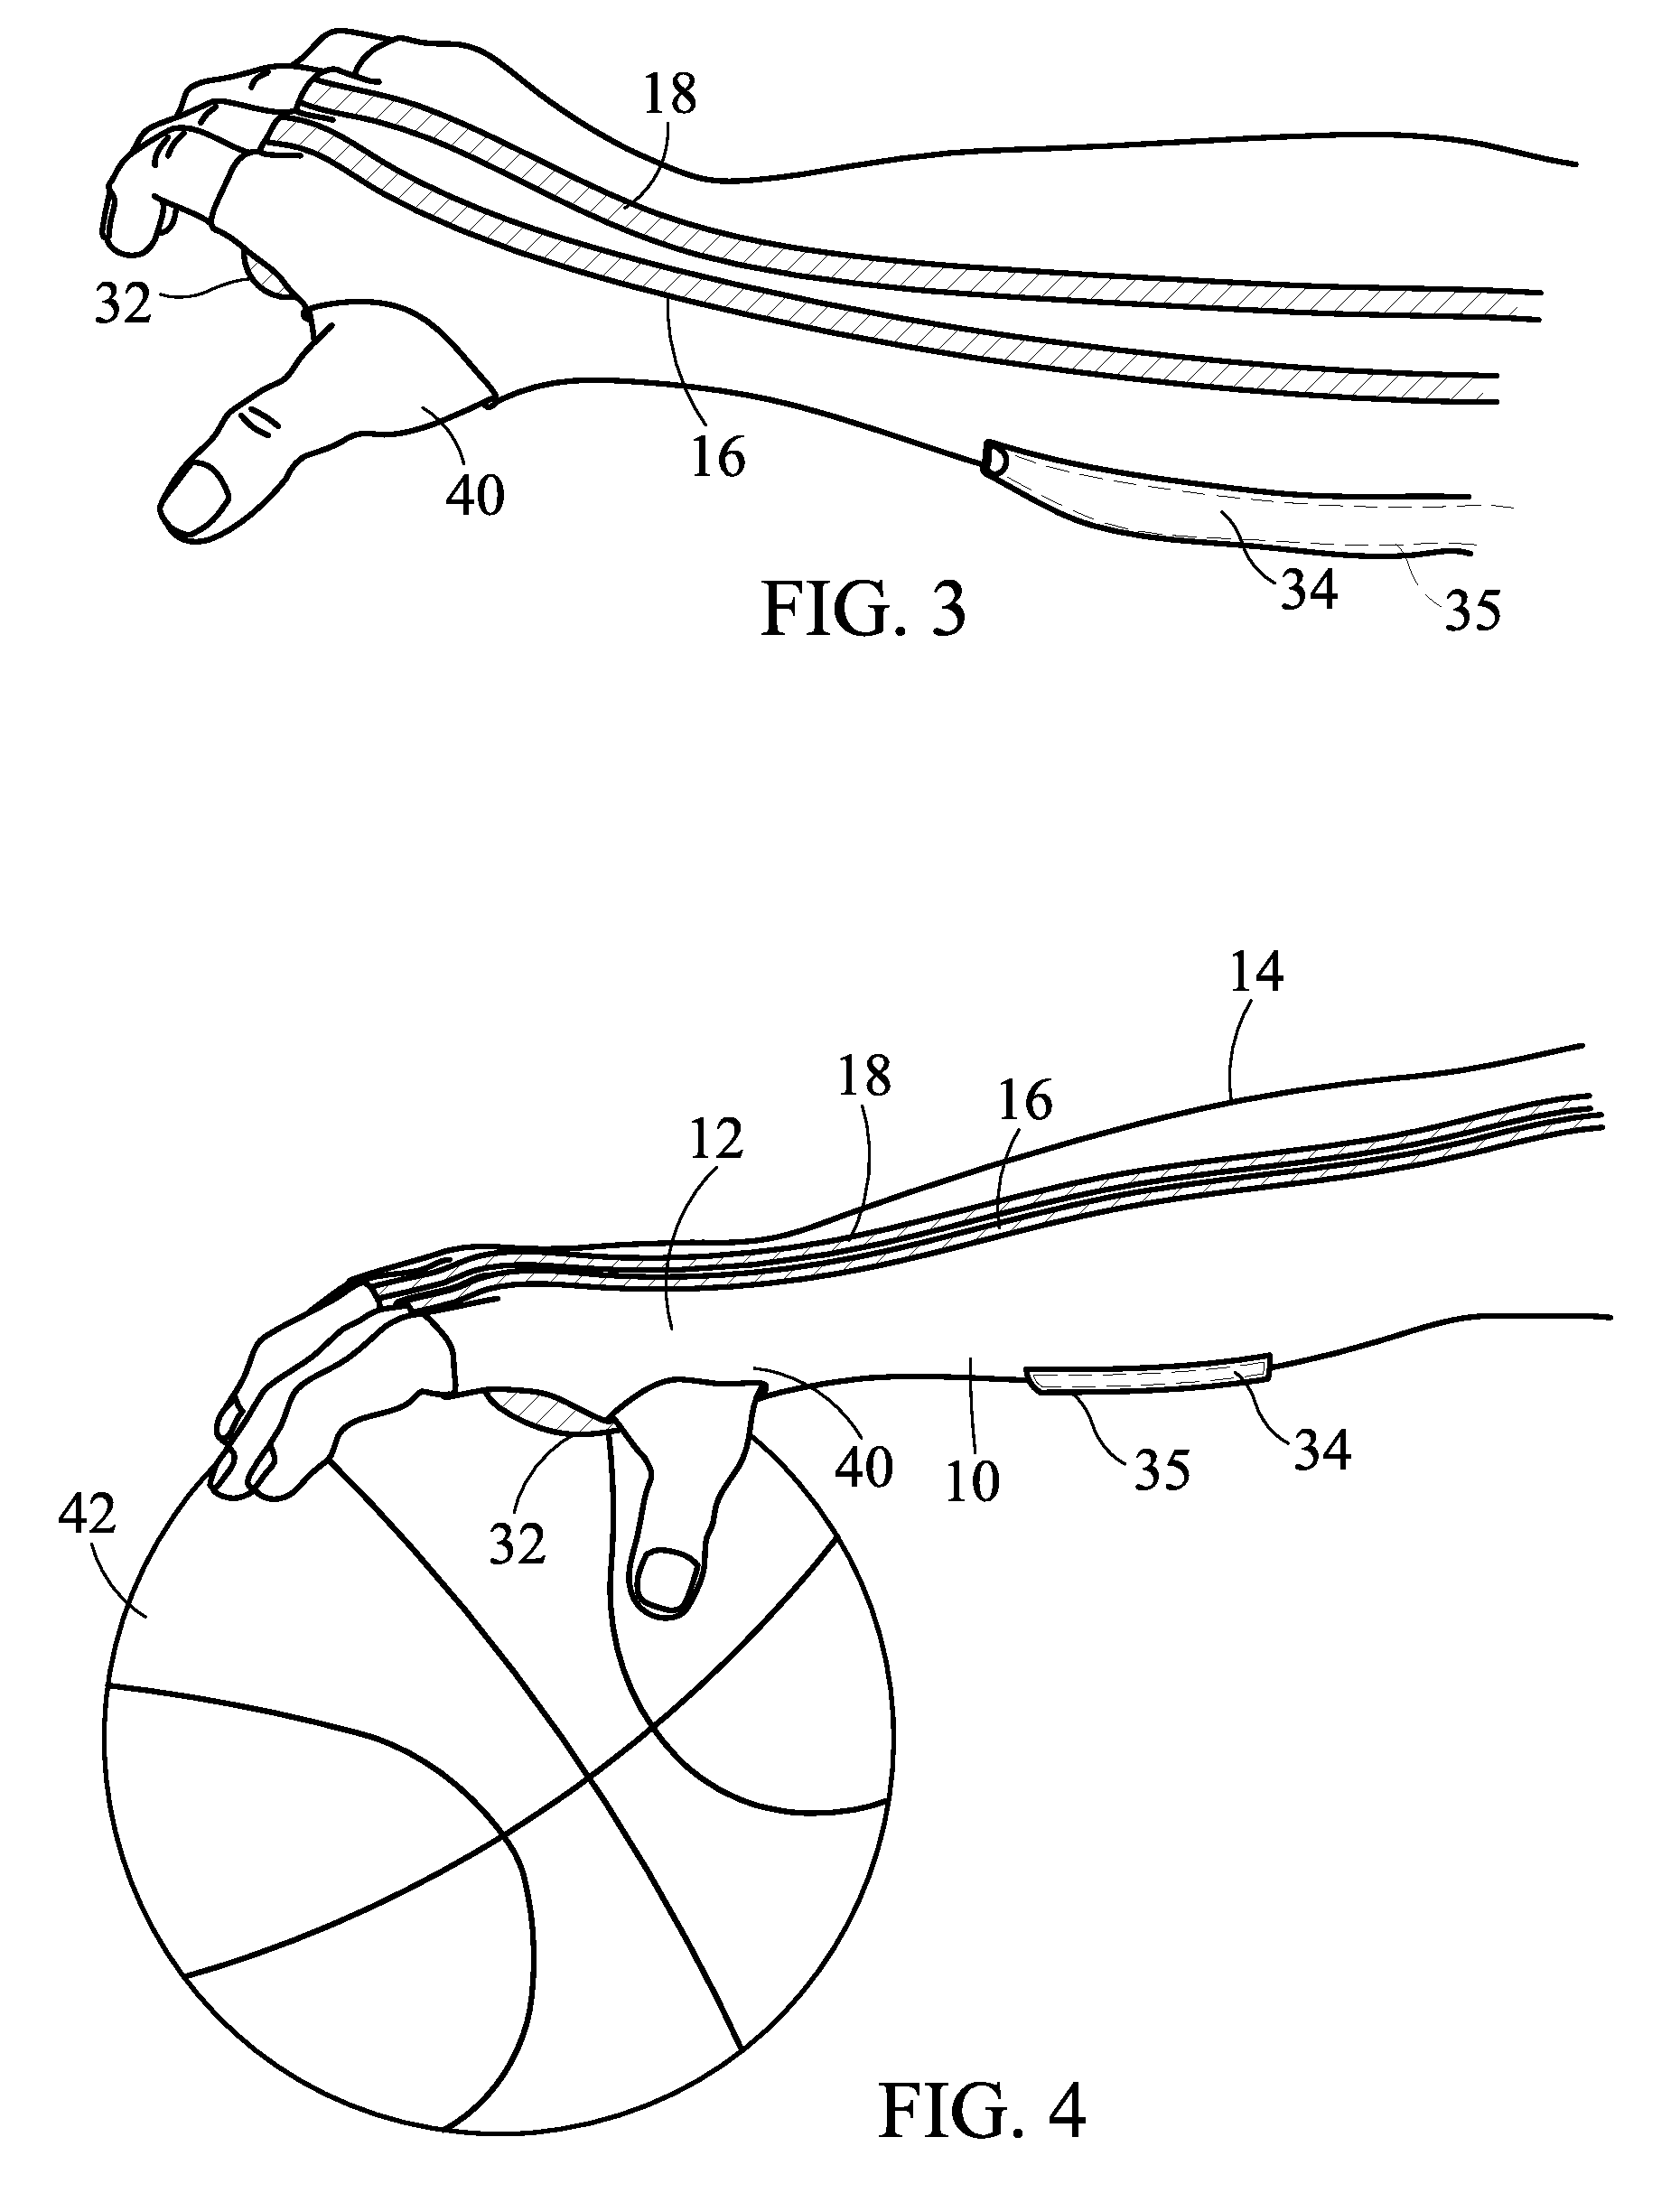 Apparatus for training an athlete and methods of using the same